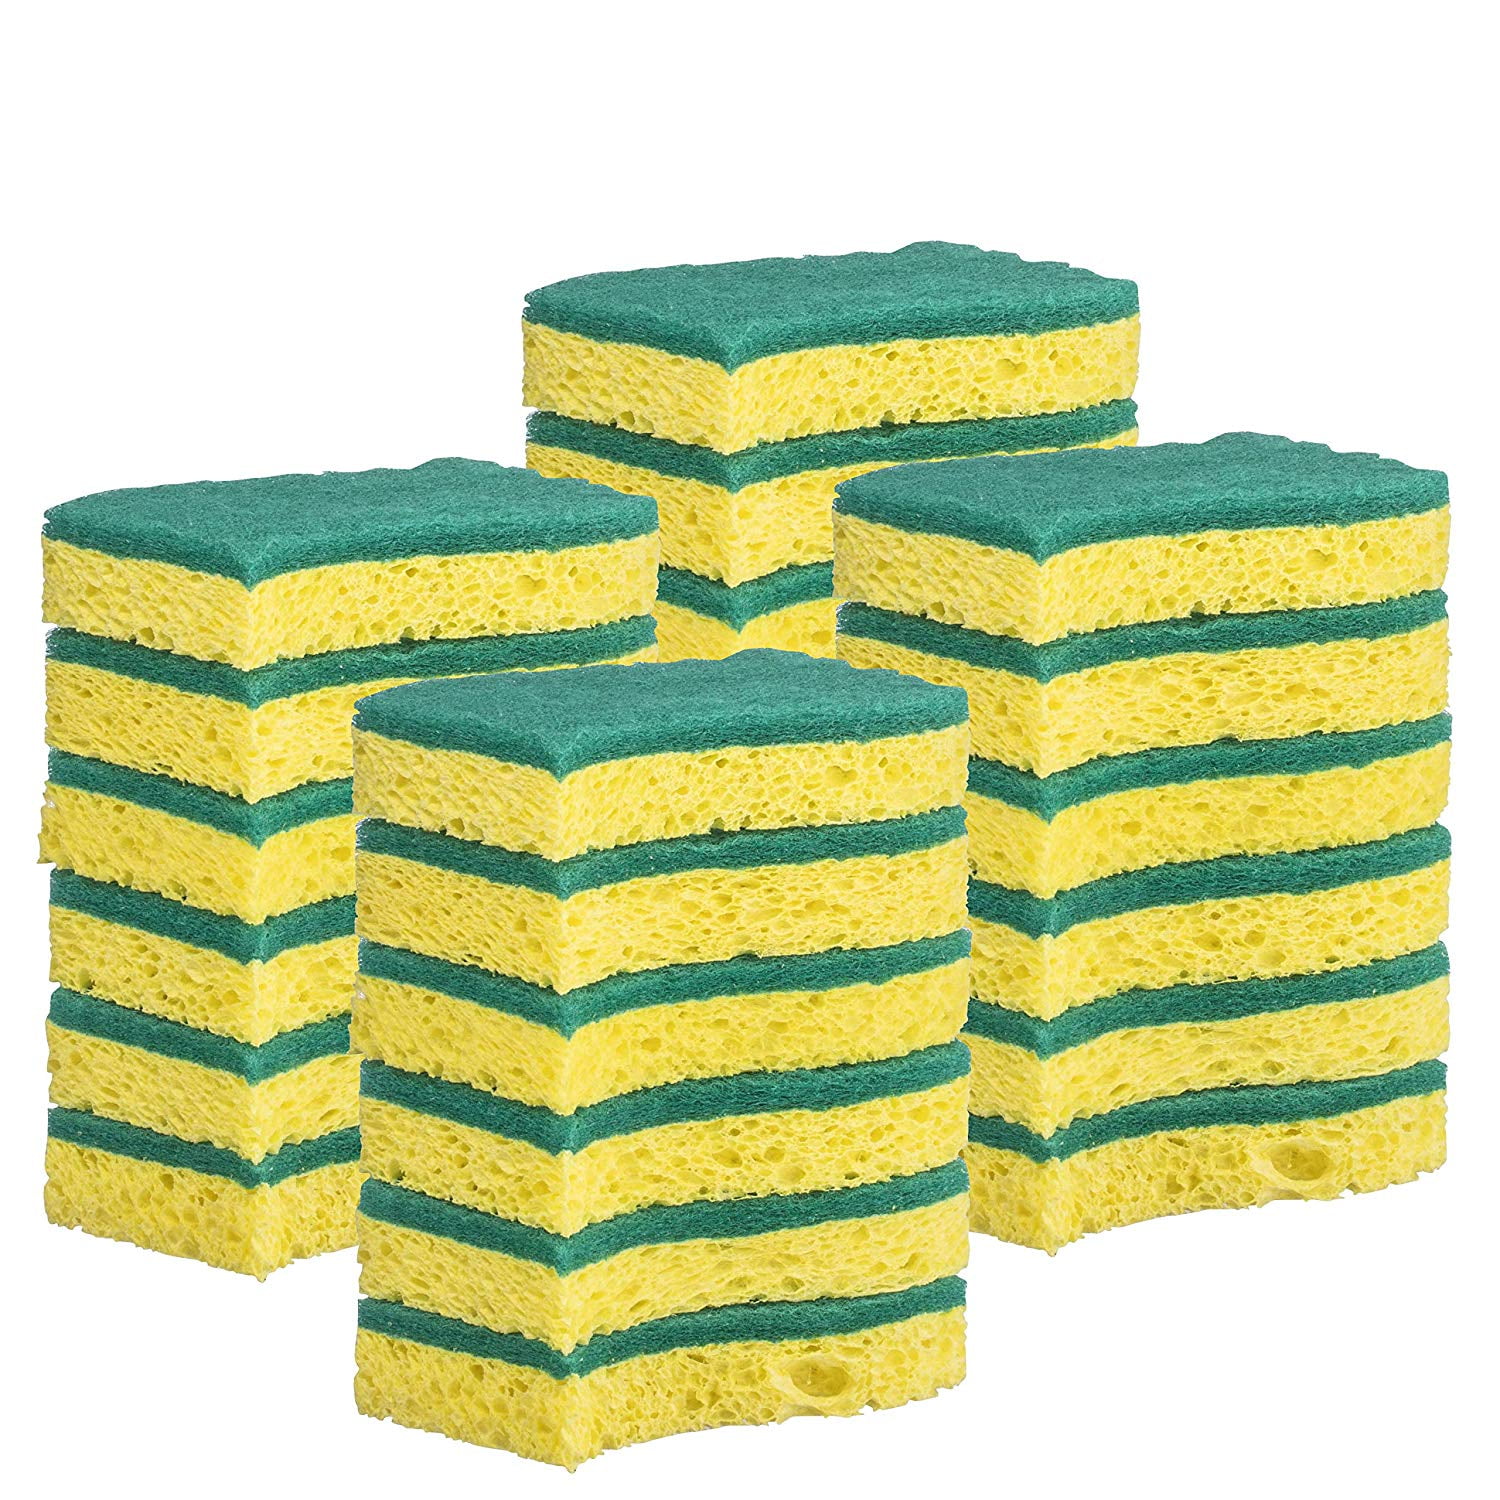 2 Packs 12 Pieces Shining Multi-Use Cleaning Sponge Kitchen Total 24 Pieces 